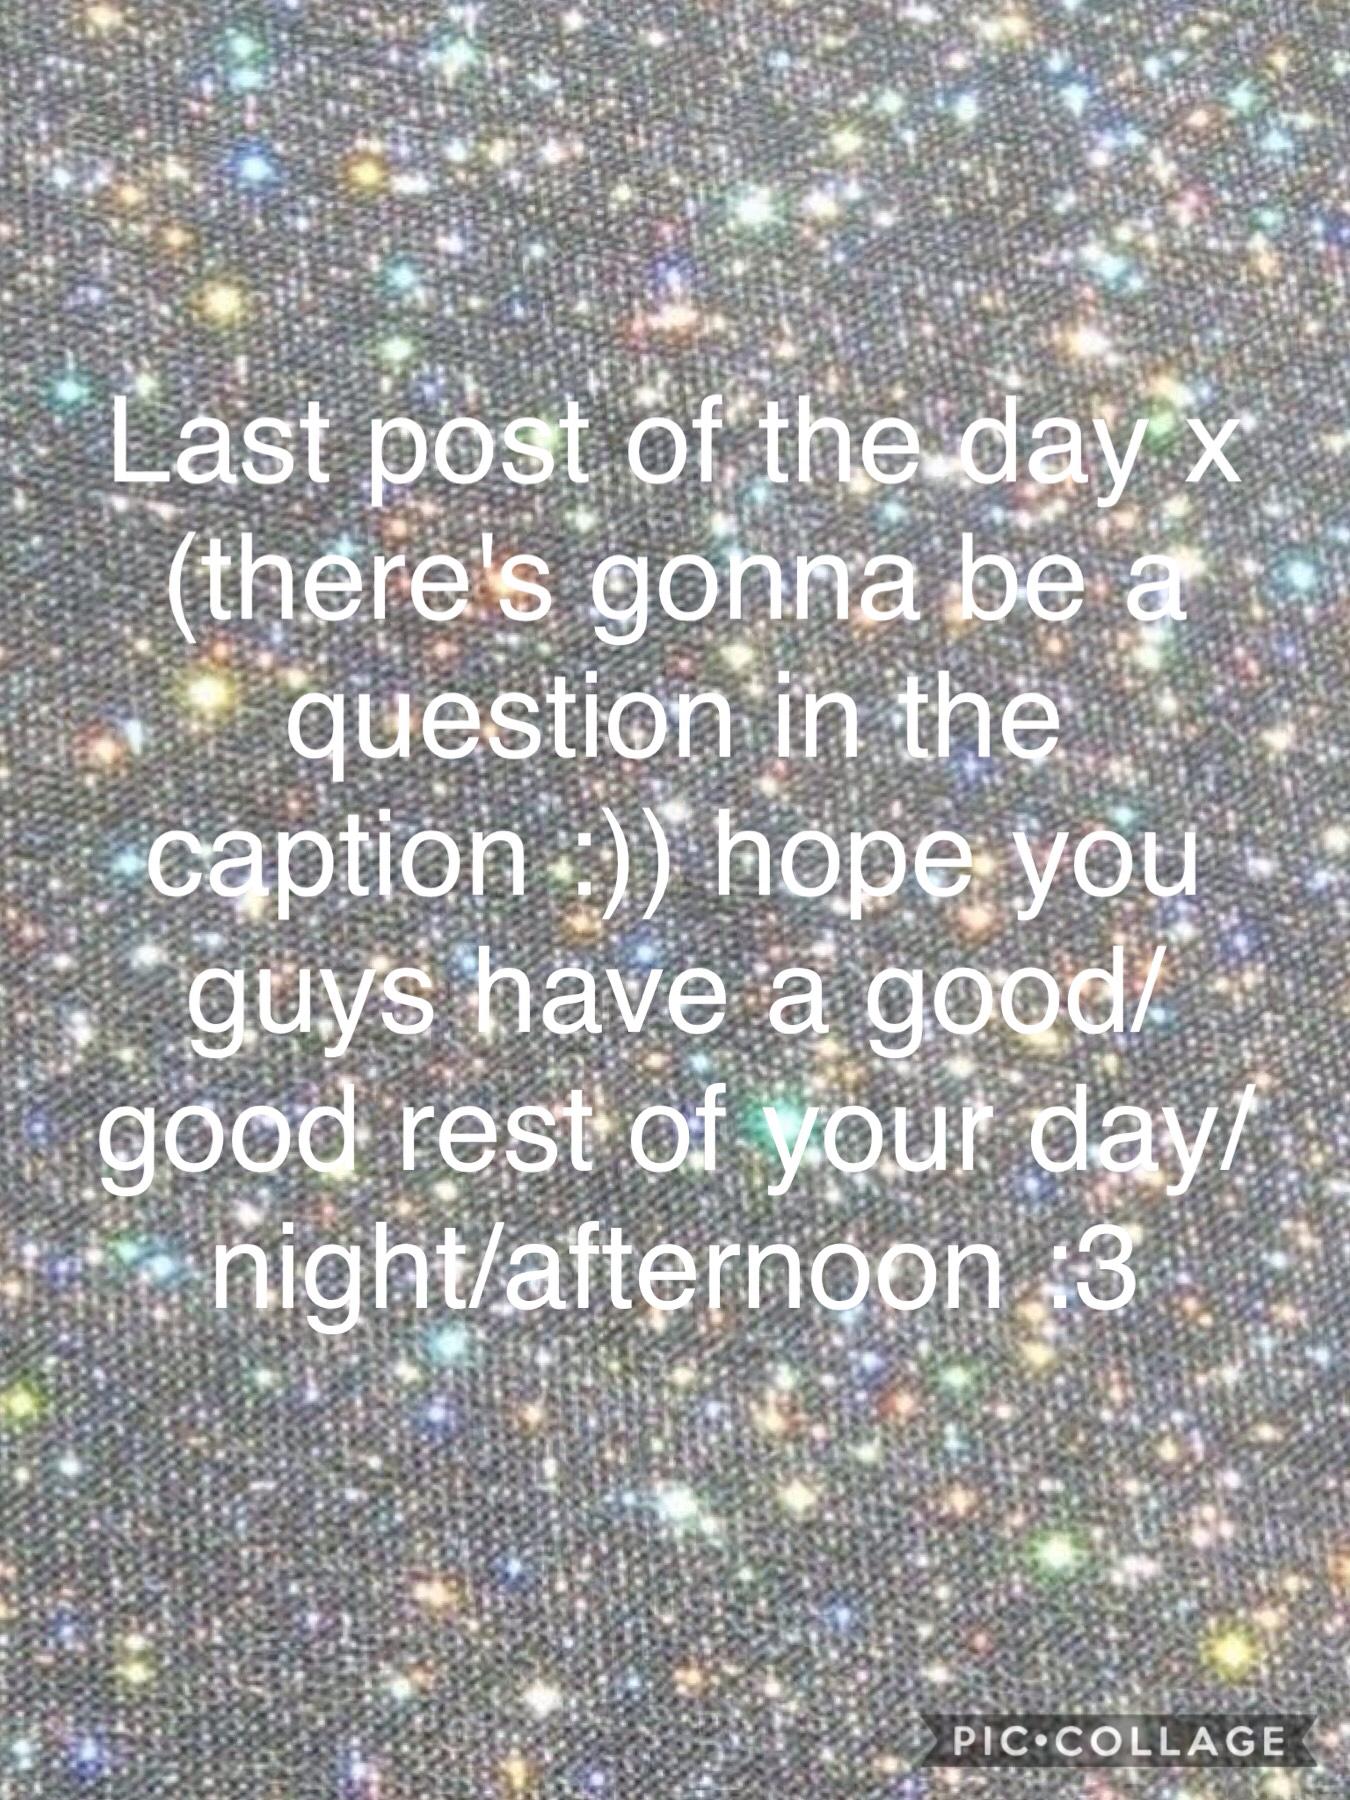 Qotd: How are you guys? (Tap for my answer)
Aotd: I'm fine but I don't feel very good x 😕💞